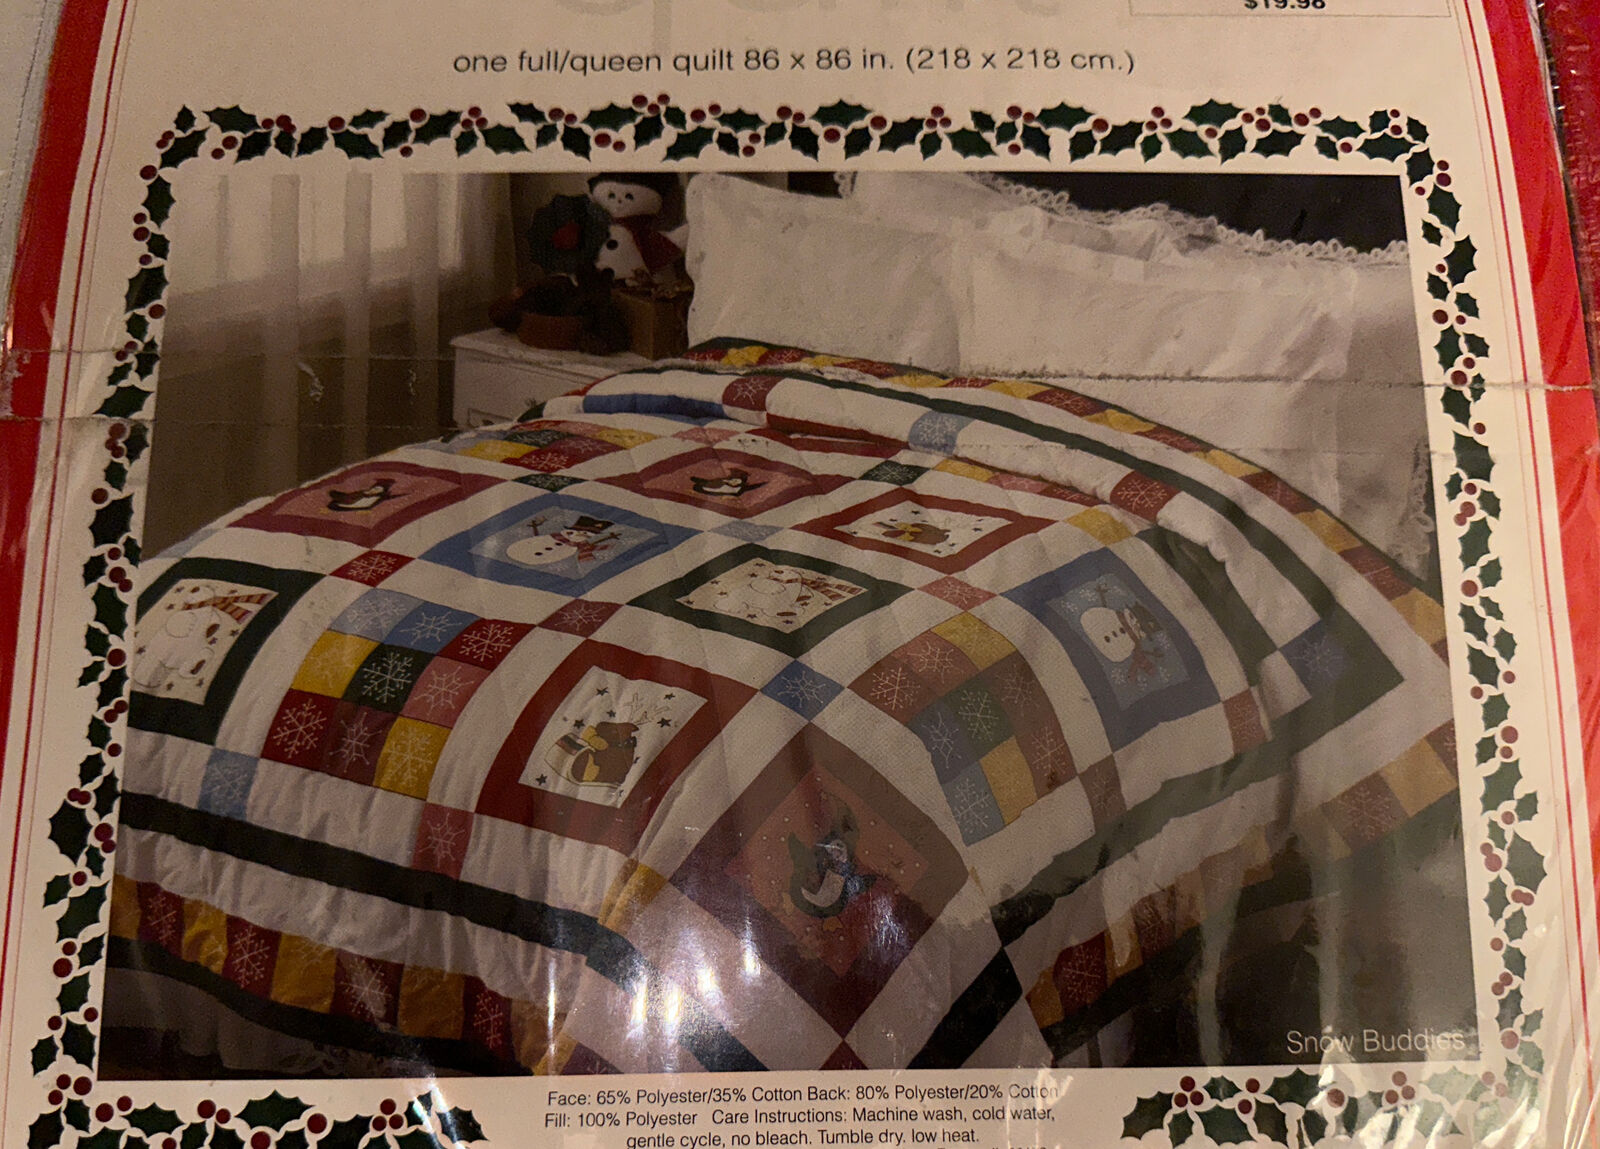 Vintage NOS Sears Snow Buddies Holiday Patchwork Quilt FULL / QUEEN New Original